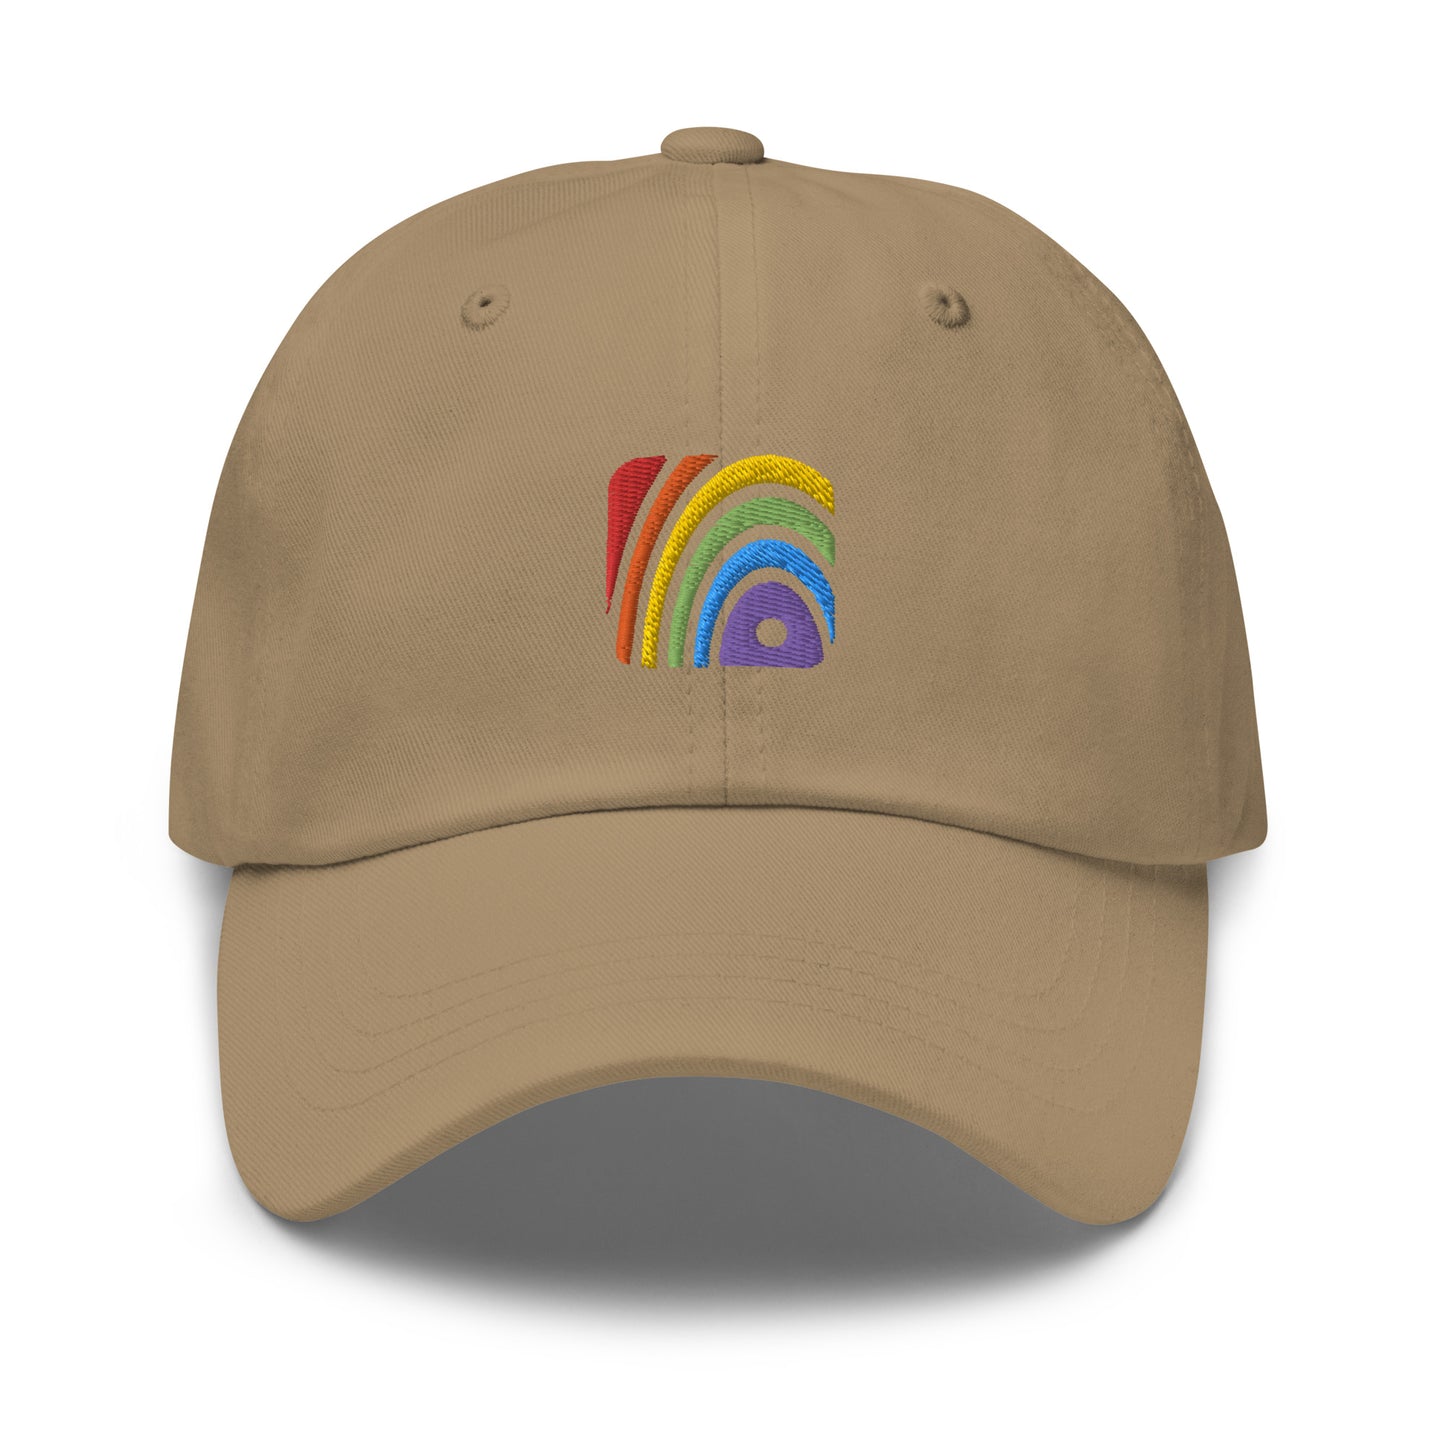 Khaki baseball hat featuring rainbow design embroidery with a low profile, adjustable strap.